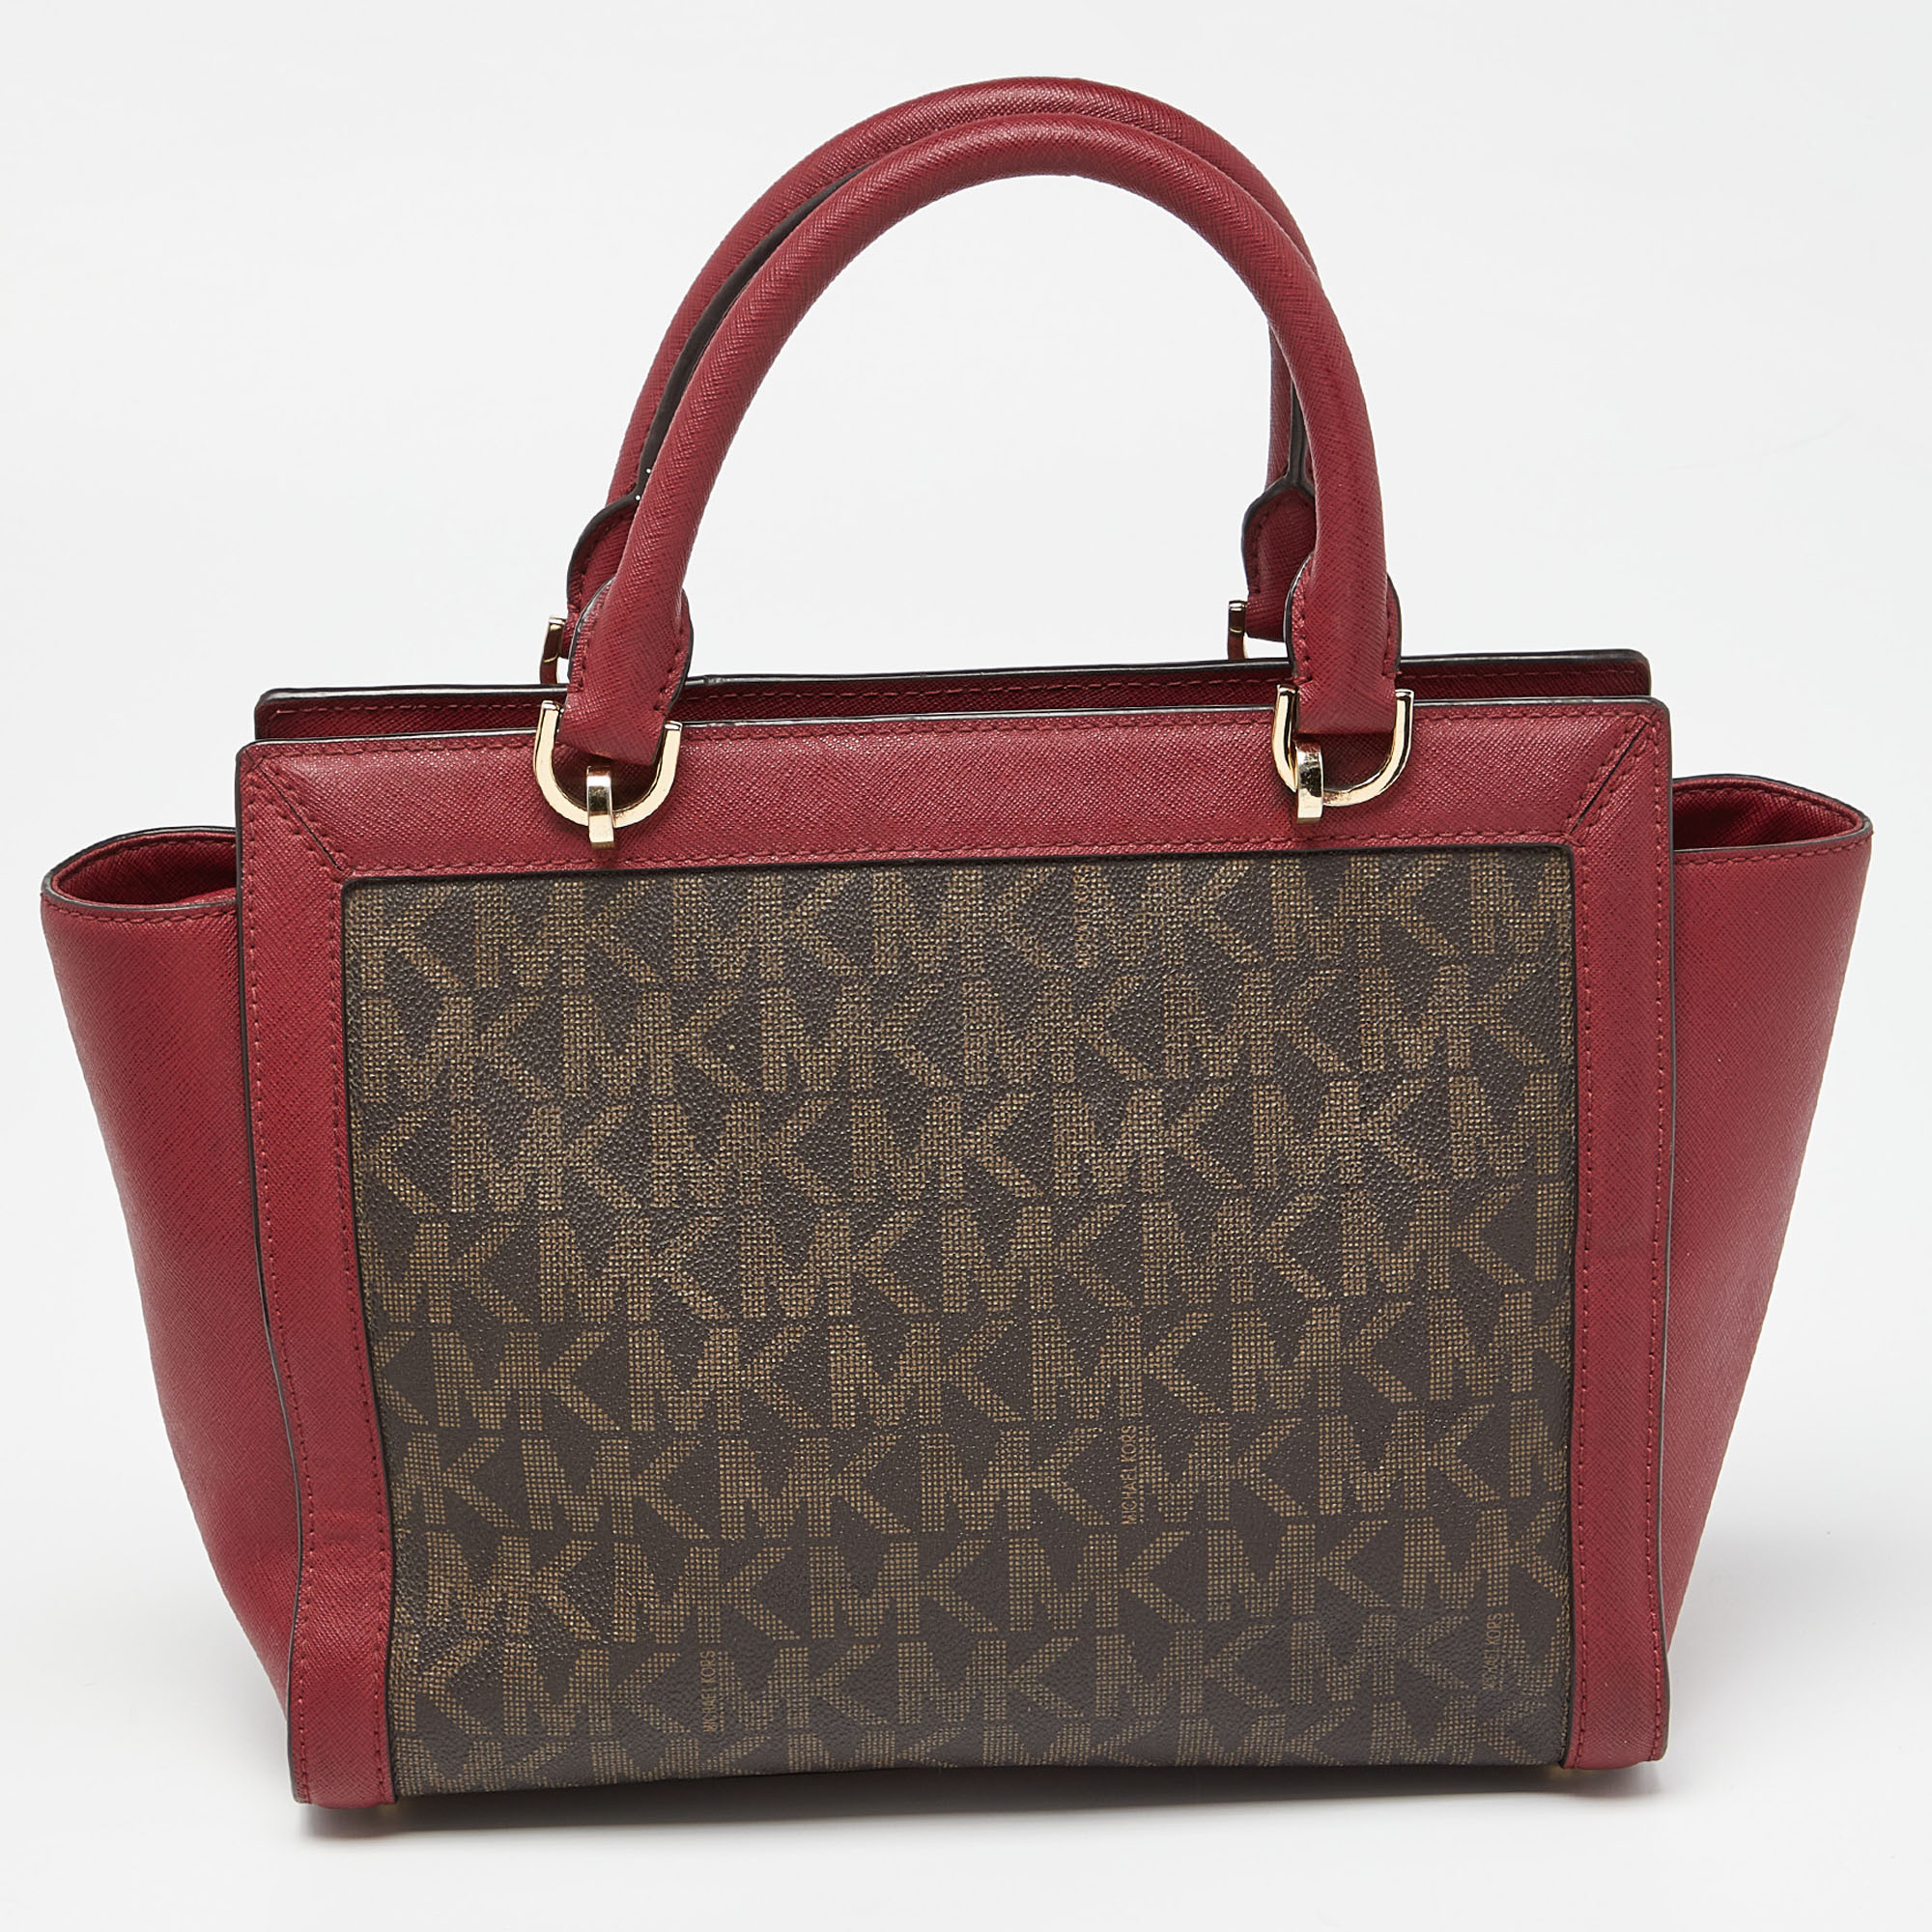 MICHAEL Micheal Kors Brown/Red Signature Coated Canvas And Leather Tina Satchel